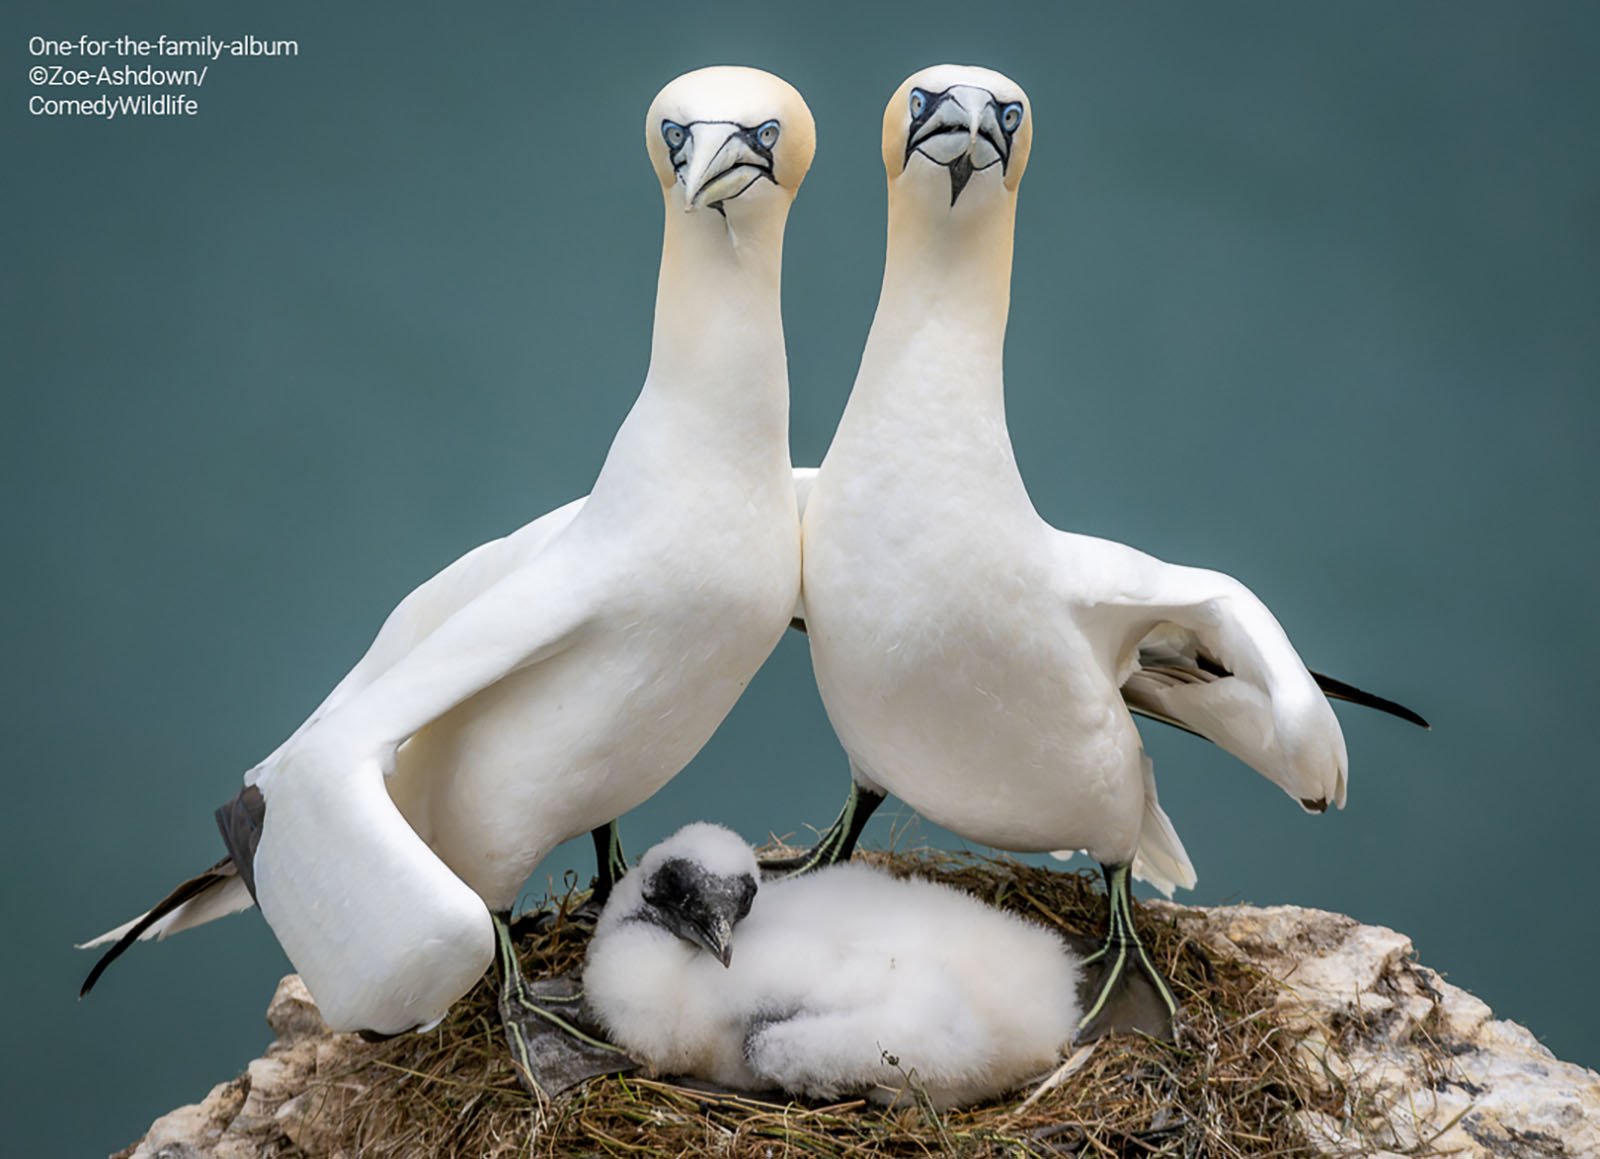 A family of Northern Gannet birds poses in a nest with two adults above a baby.